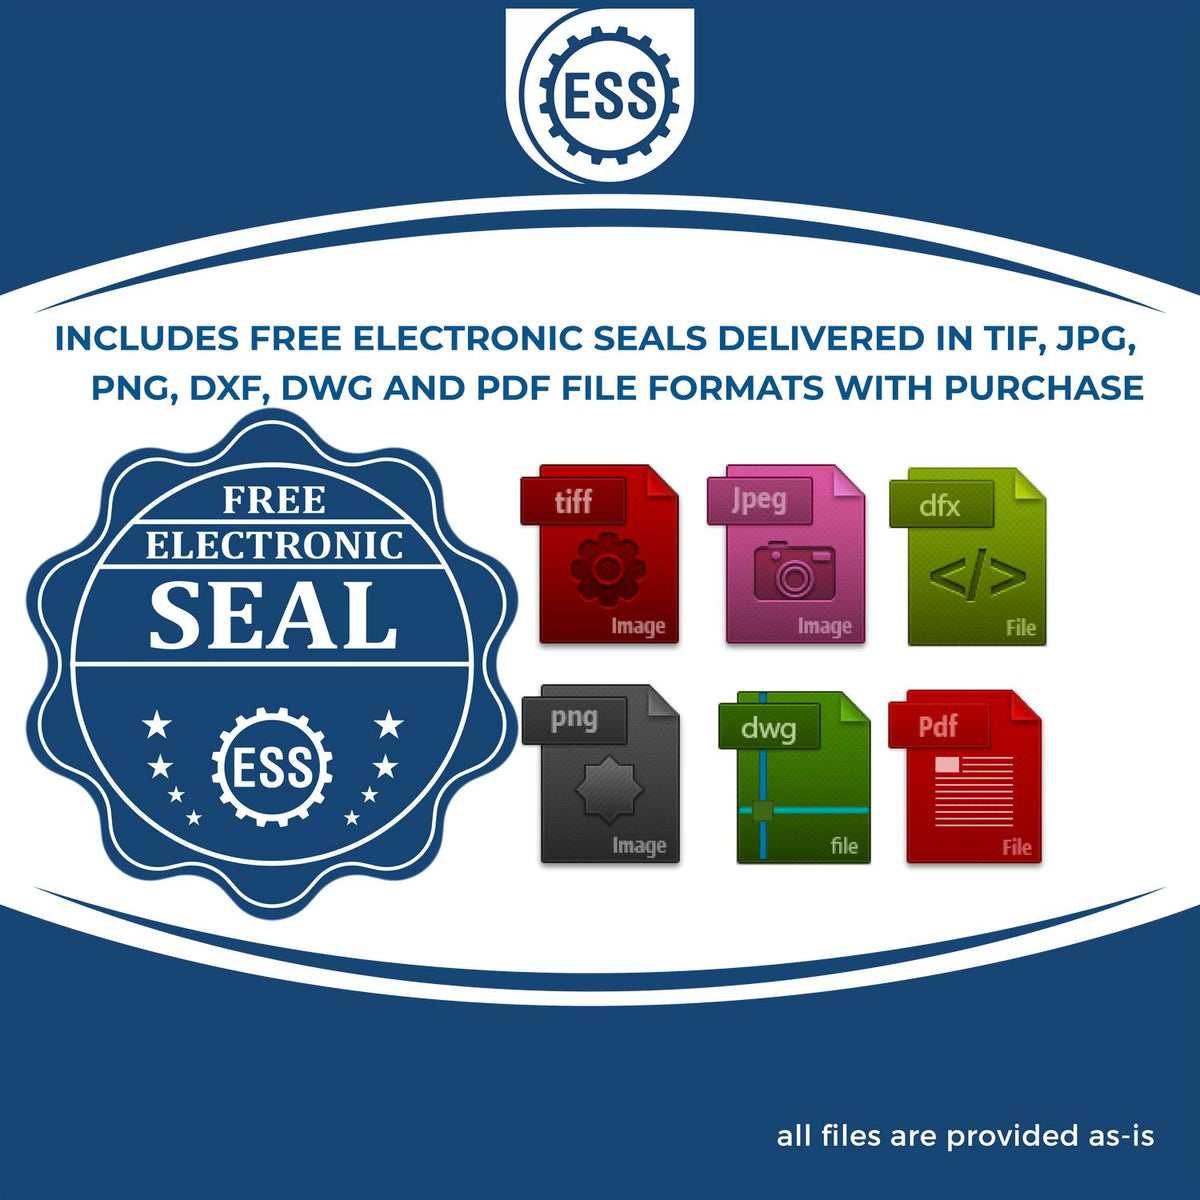 An infographic for the free electronic seal for the Wooden Handle Illinois Rectangular Notary Public Stamp illustrating the different file type icons such as DXF, DWG, TIF, JPG and PNG.